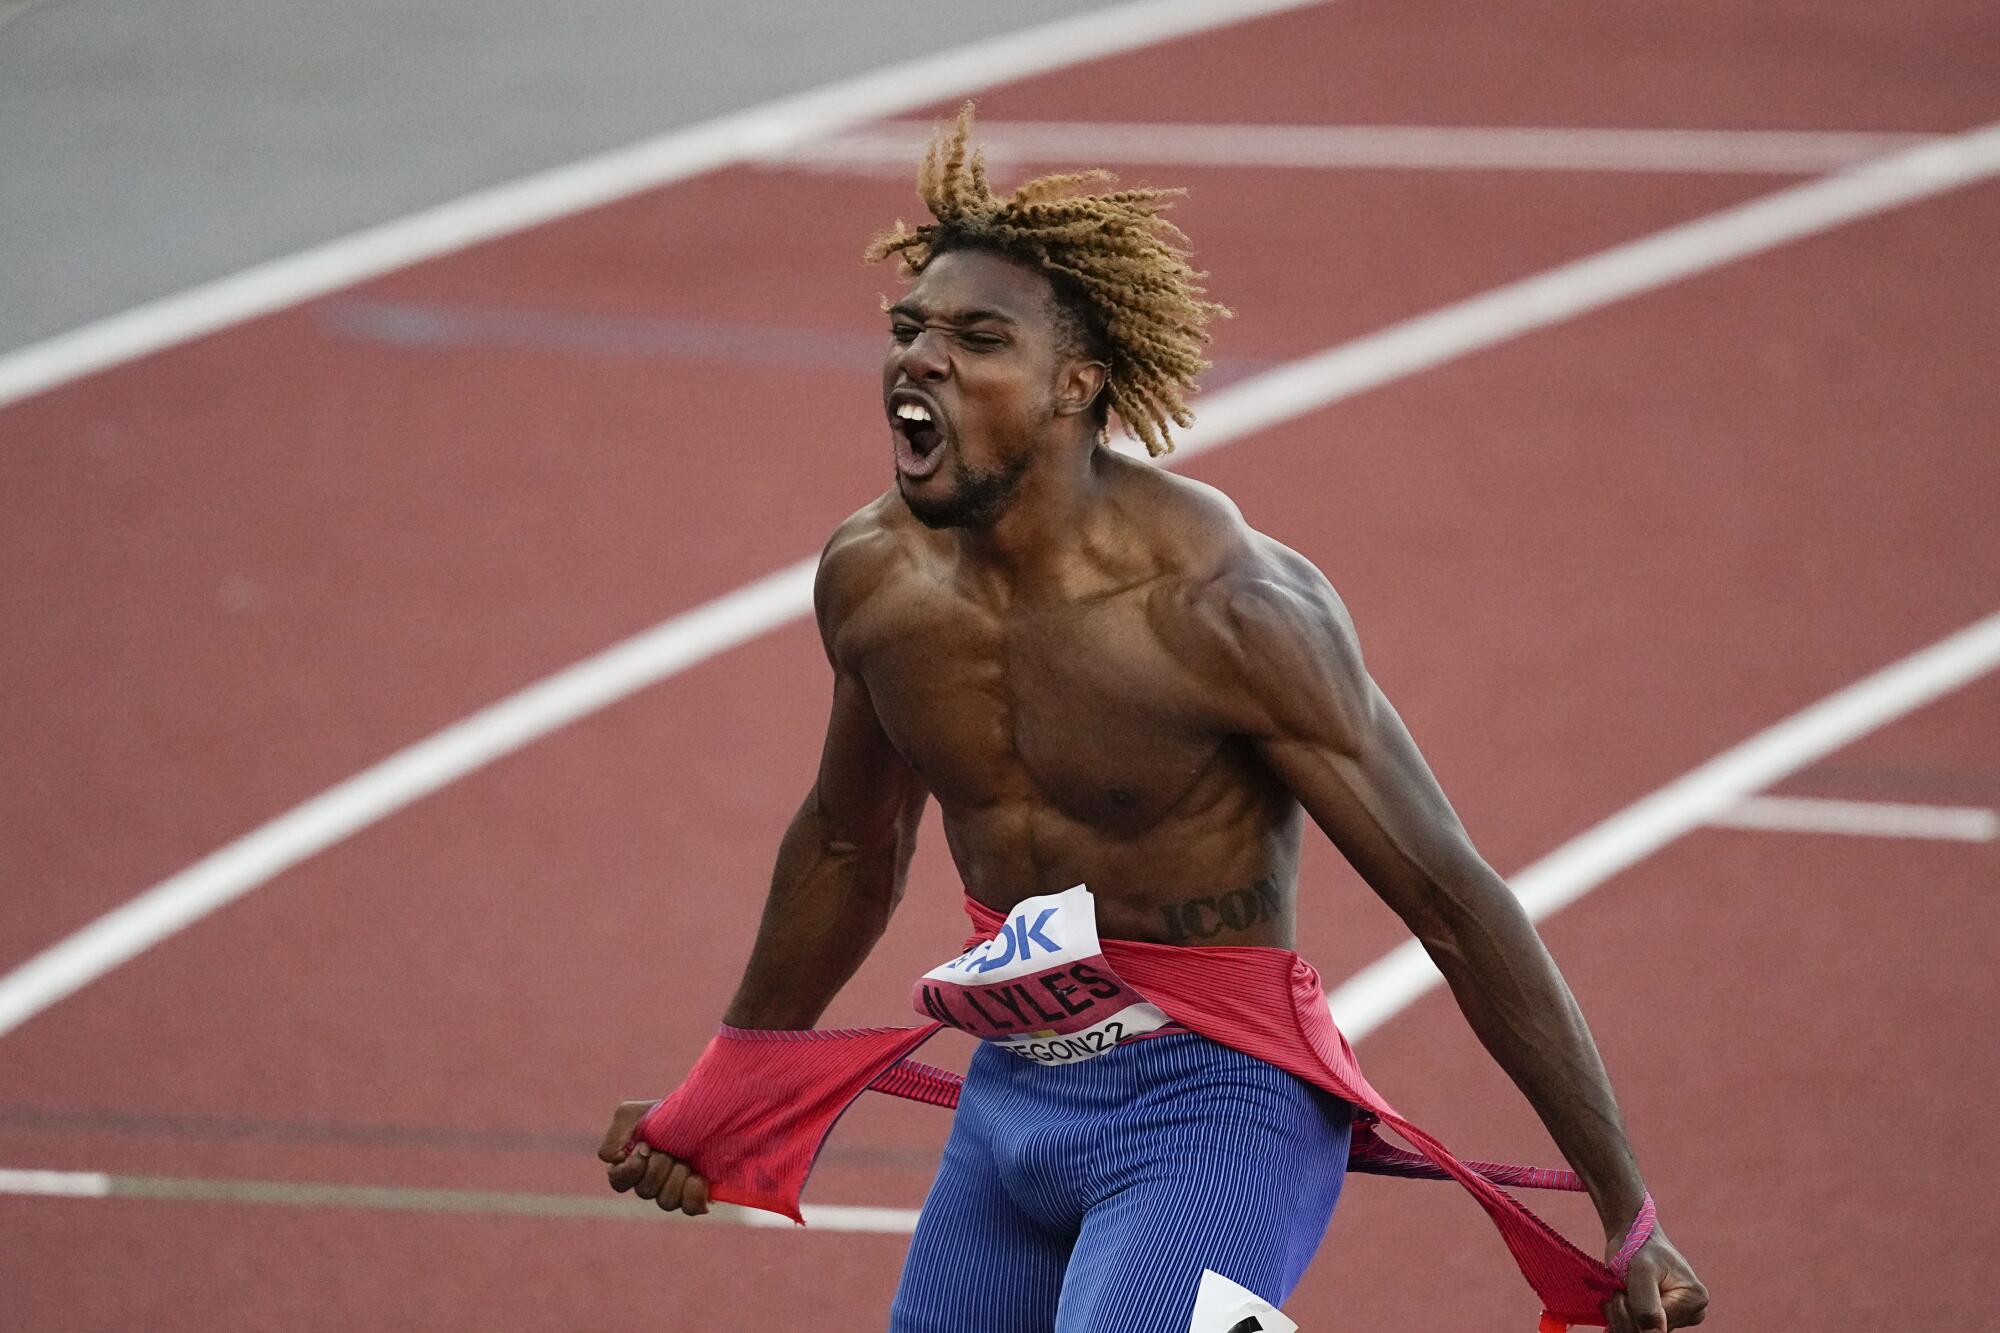 Noah Lyles flexes with his uniform tearing apart after winning the 200-meter dash at the 2022 world championships.